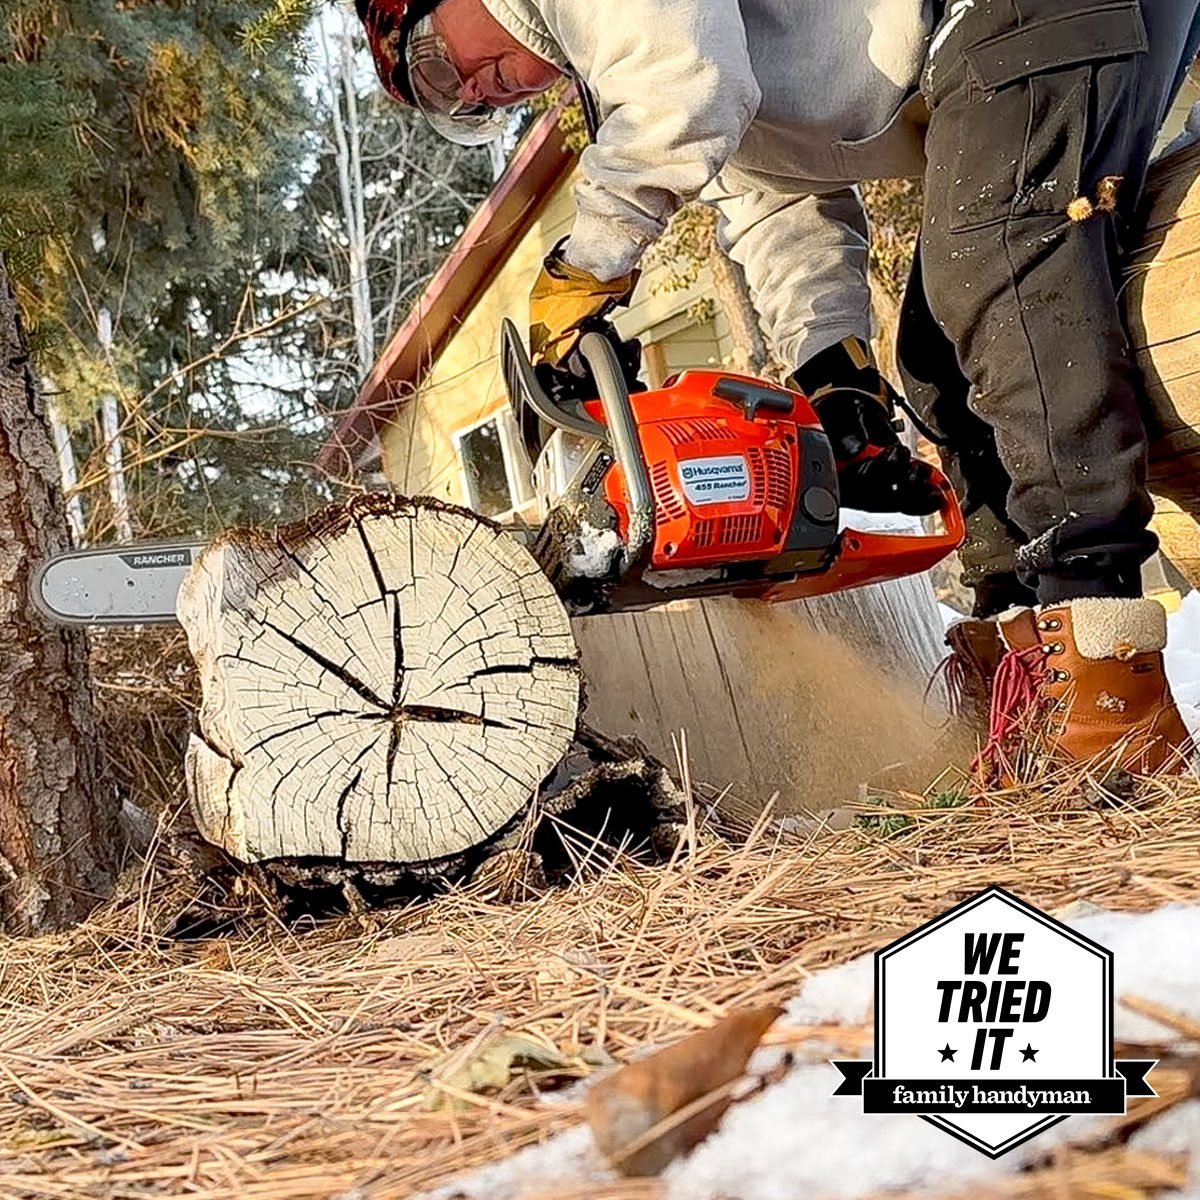 Husqvarna 455 Rancher Chainsaw Review: A Powerful Saw Capable of Nearly Any Task